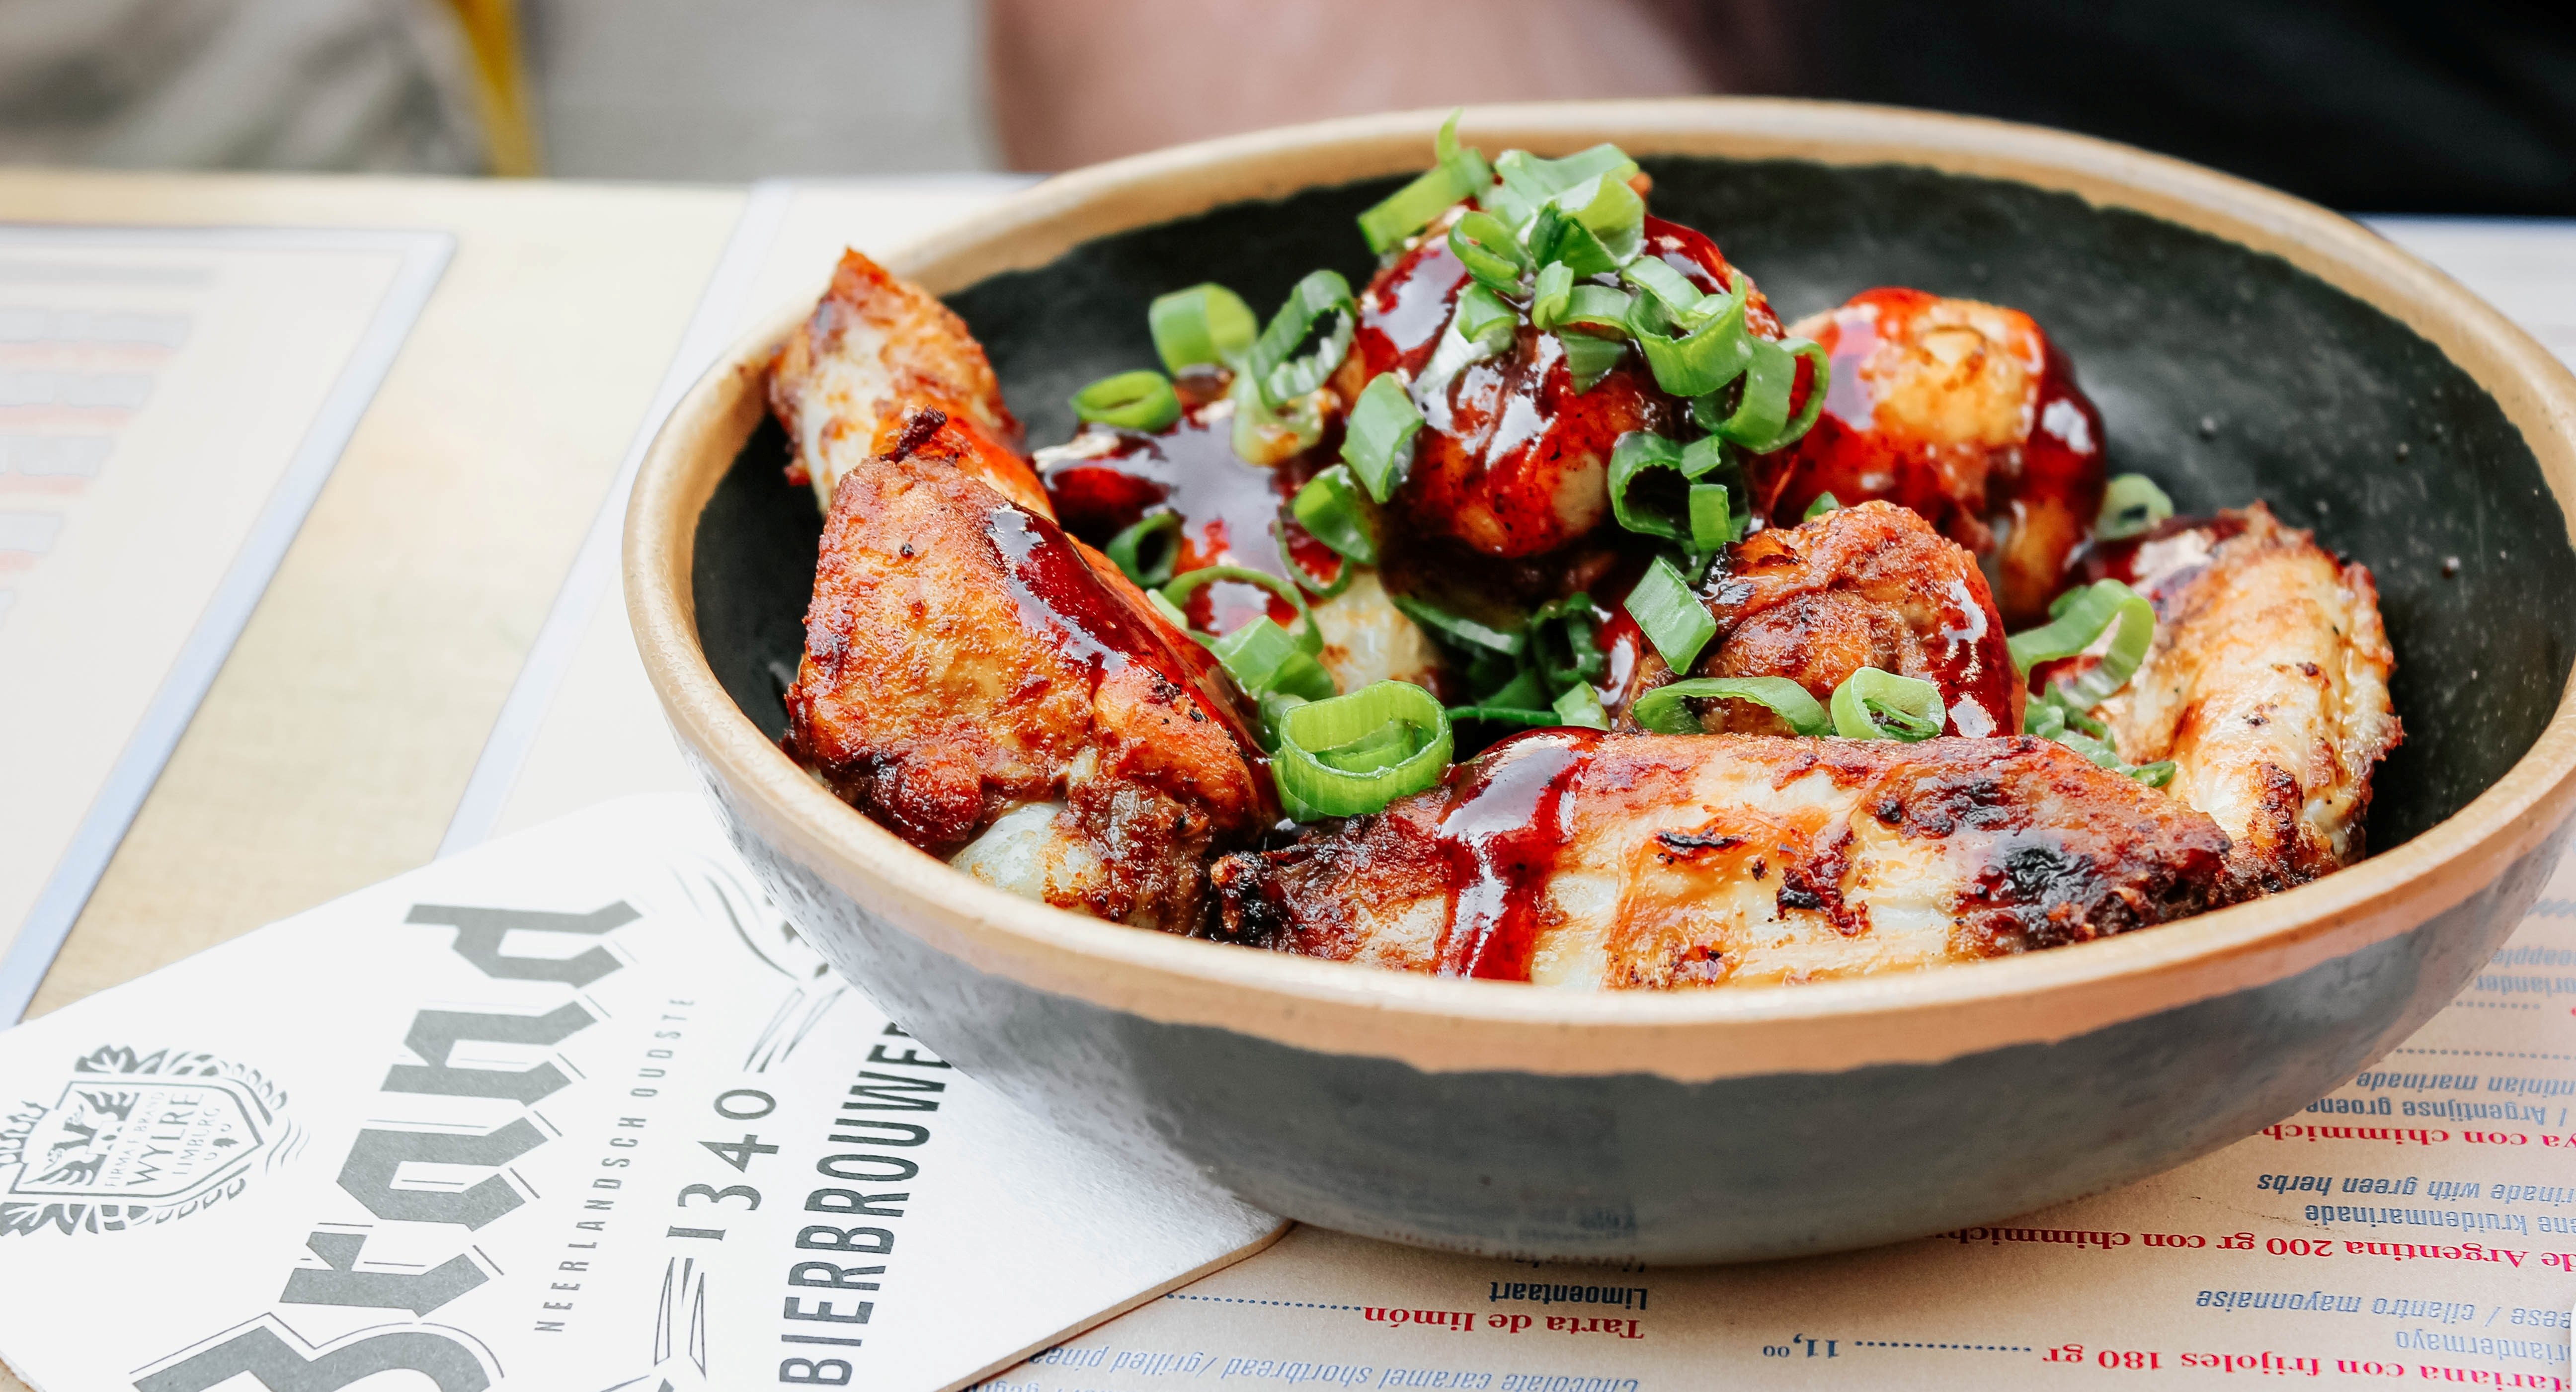 EAT: Wing-Fest at Plan B, Q Mex Opens in World City, Nooxo Closes, Mexican Dinner at The Hutong